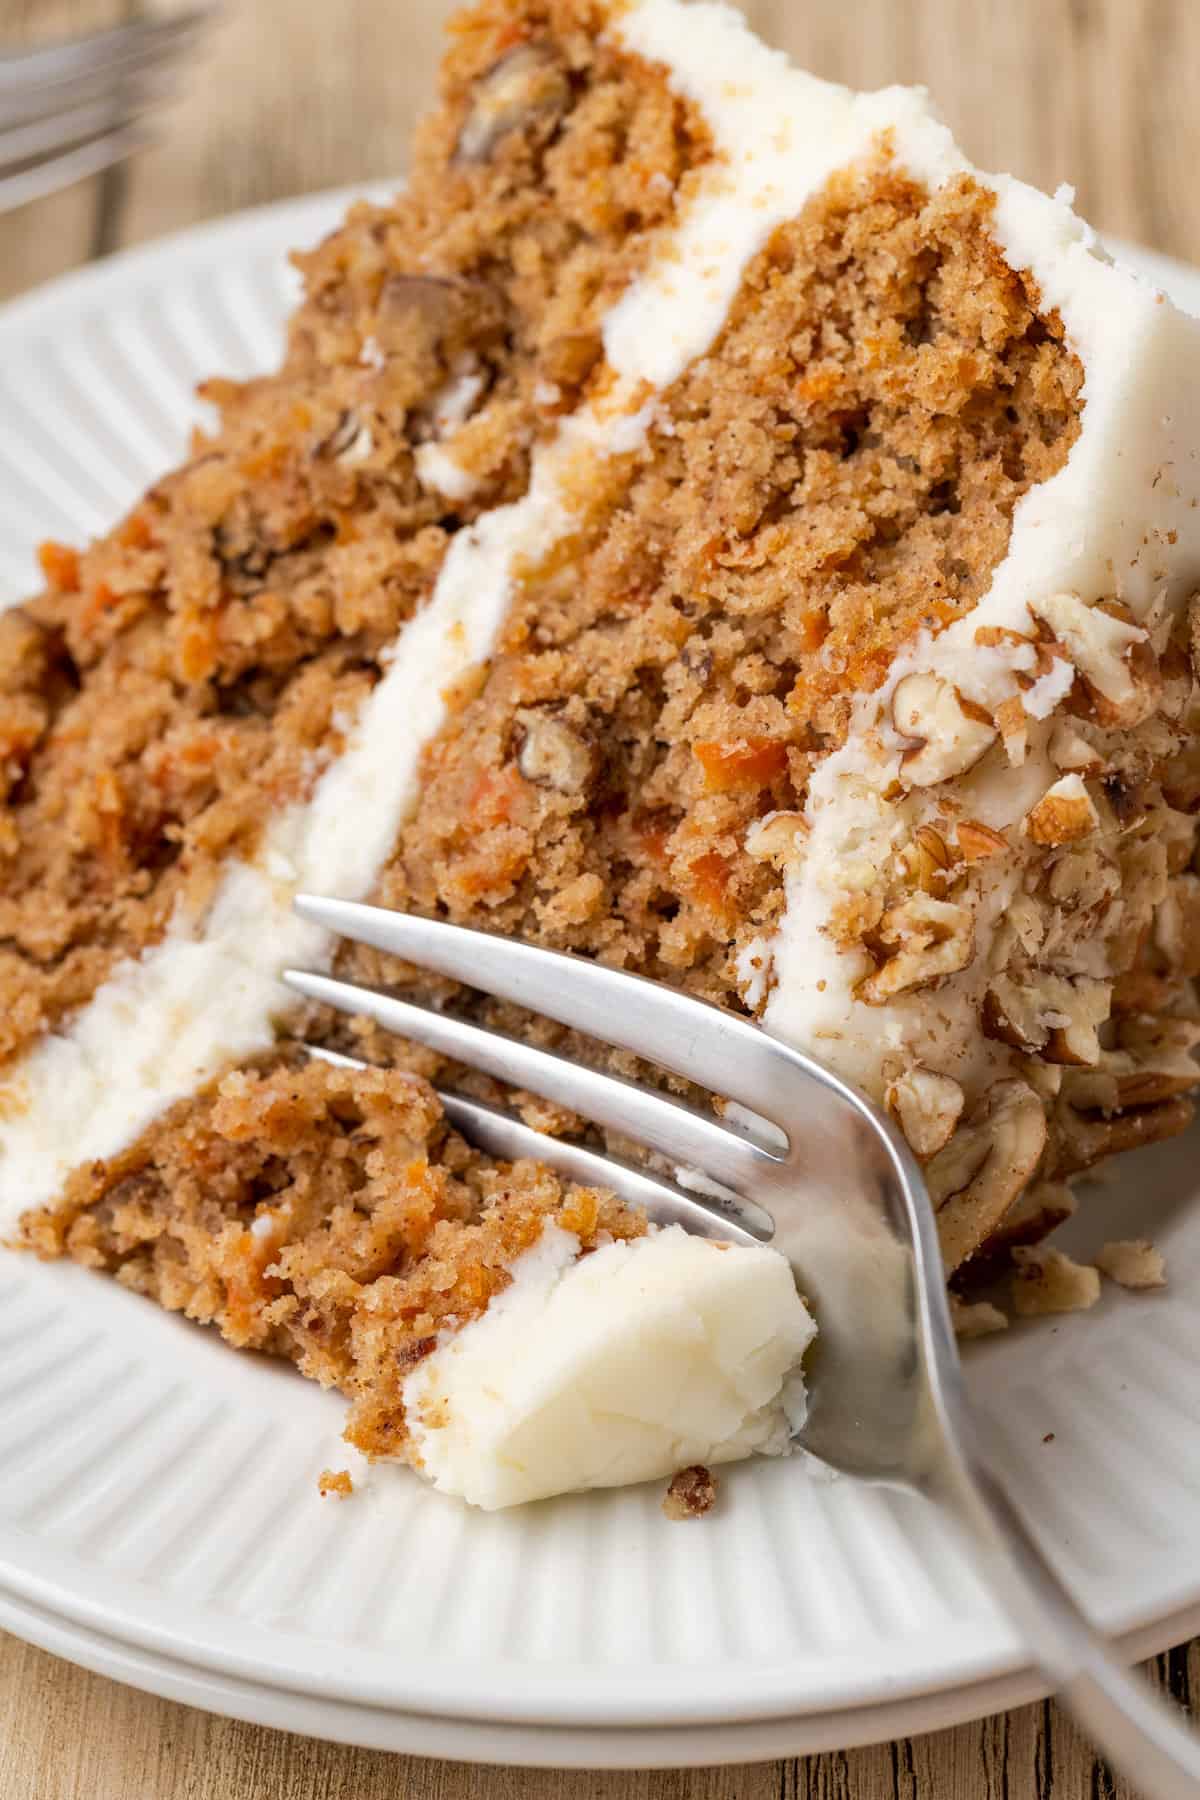 A fork cuts into the corner of a slice of frosted gluten-free carrot cake on a white plate.